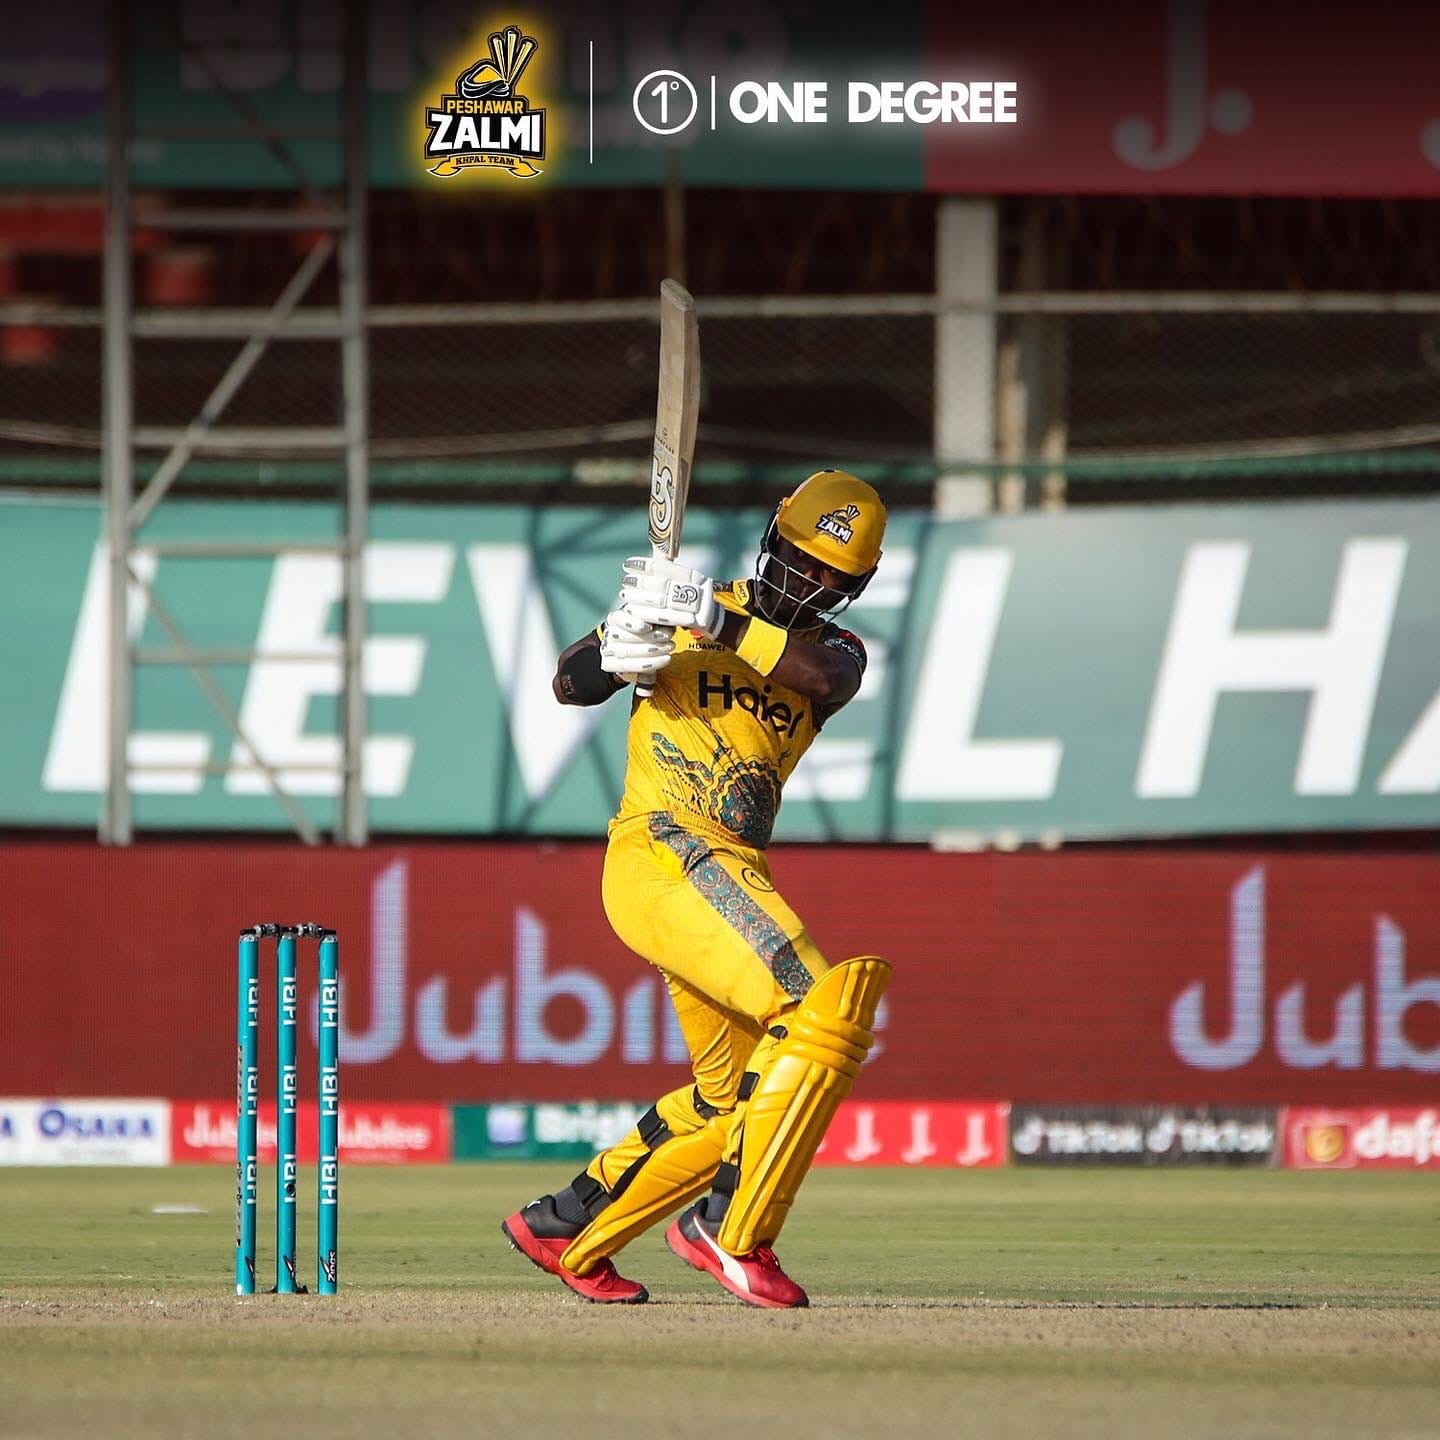 PSL 2022: Peshawar Zalmi vs Lahore Qalandars as both teams chasing second victory in PSL - find out more